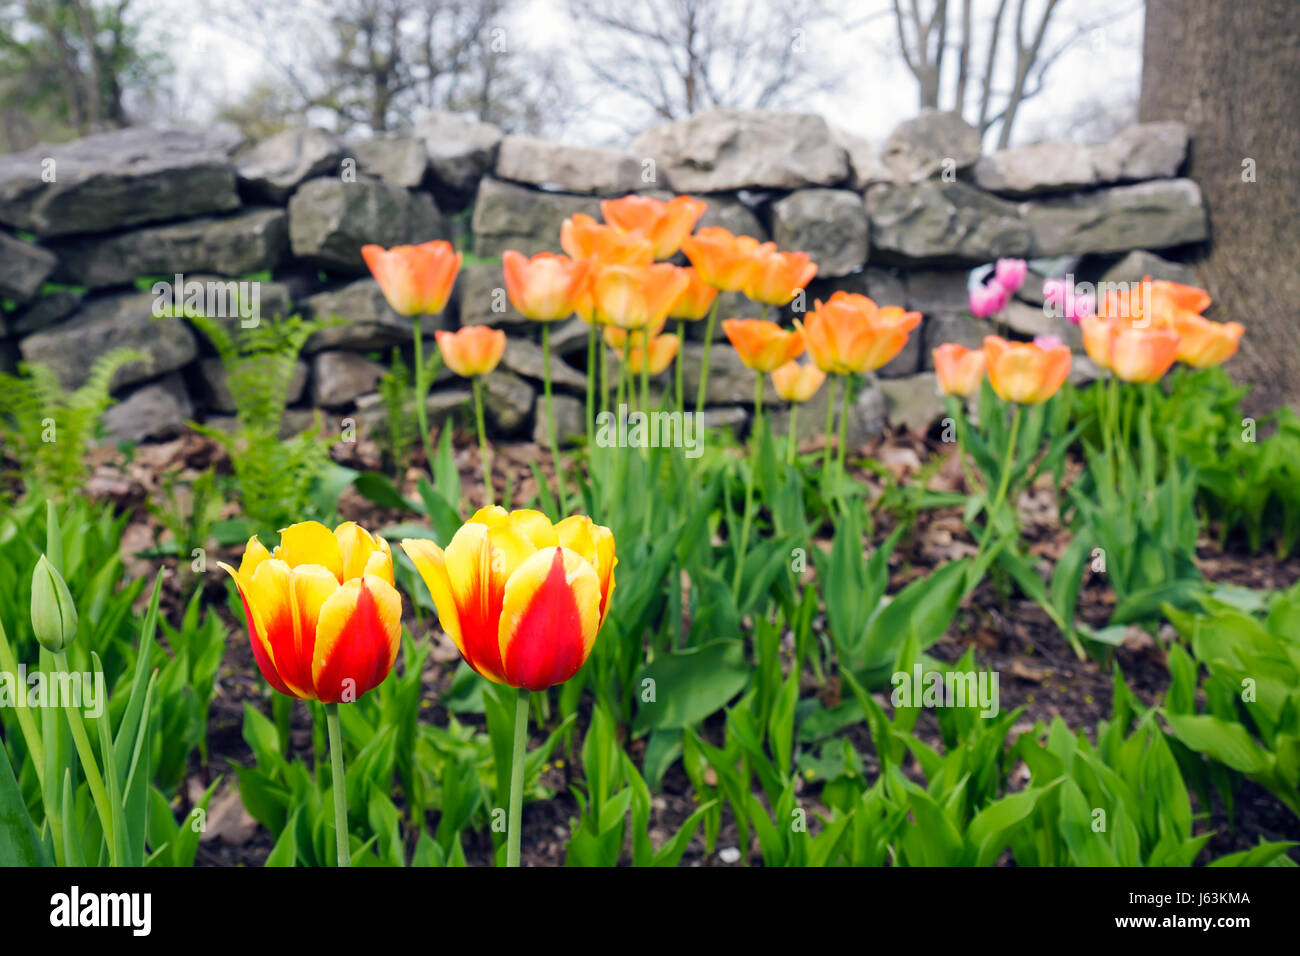 Michigan,MI,Mich,Upper Midwest,Saginaw County,Saginaw,Montague Inn,Bed and Breakfast,historic Inn,early spring,garden,rock wall,flower flowers,tulips, Stock Photo